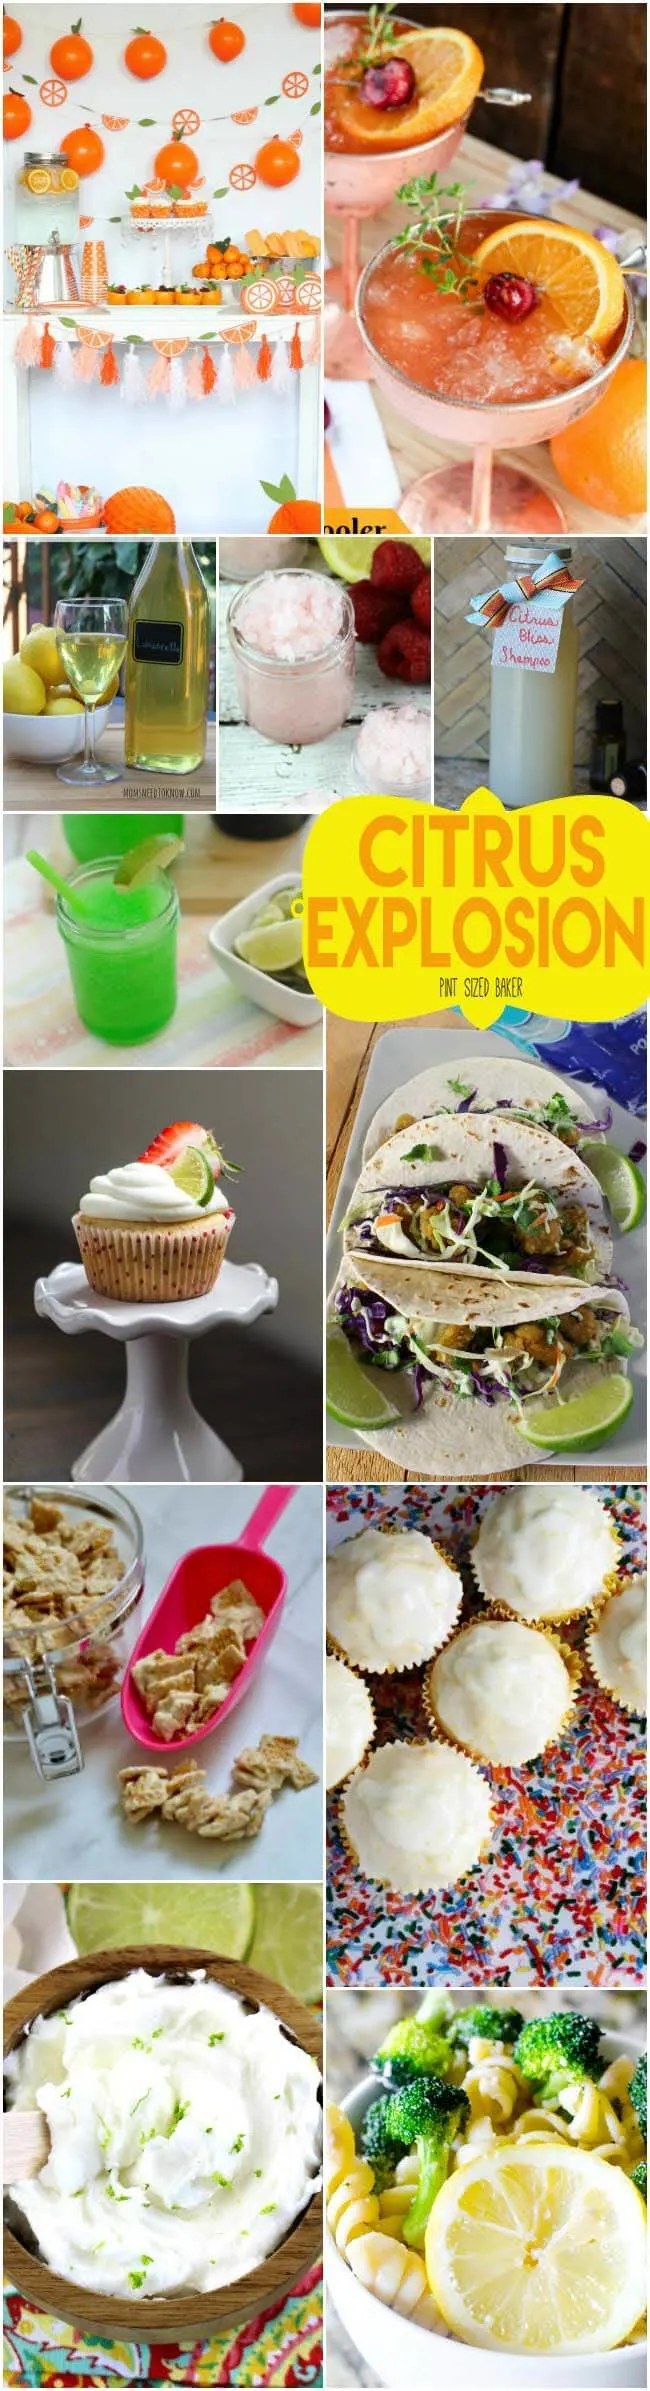 It's a Citrus Explosion - Recipes and DIY projects that are brimming with lemons, limes and oranges. The recipes taste great and the crafts smell wonderful!